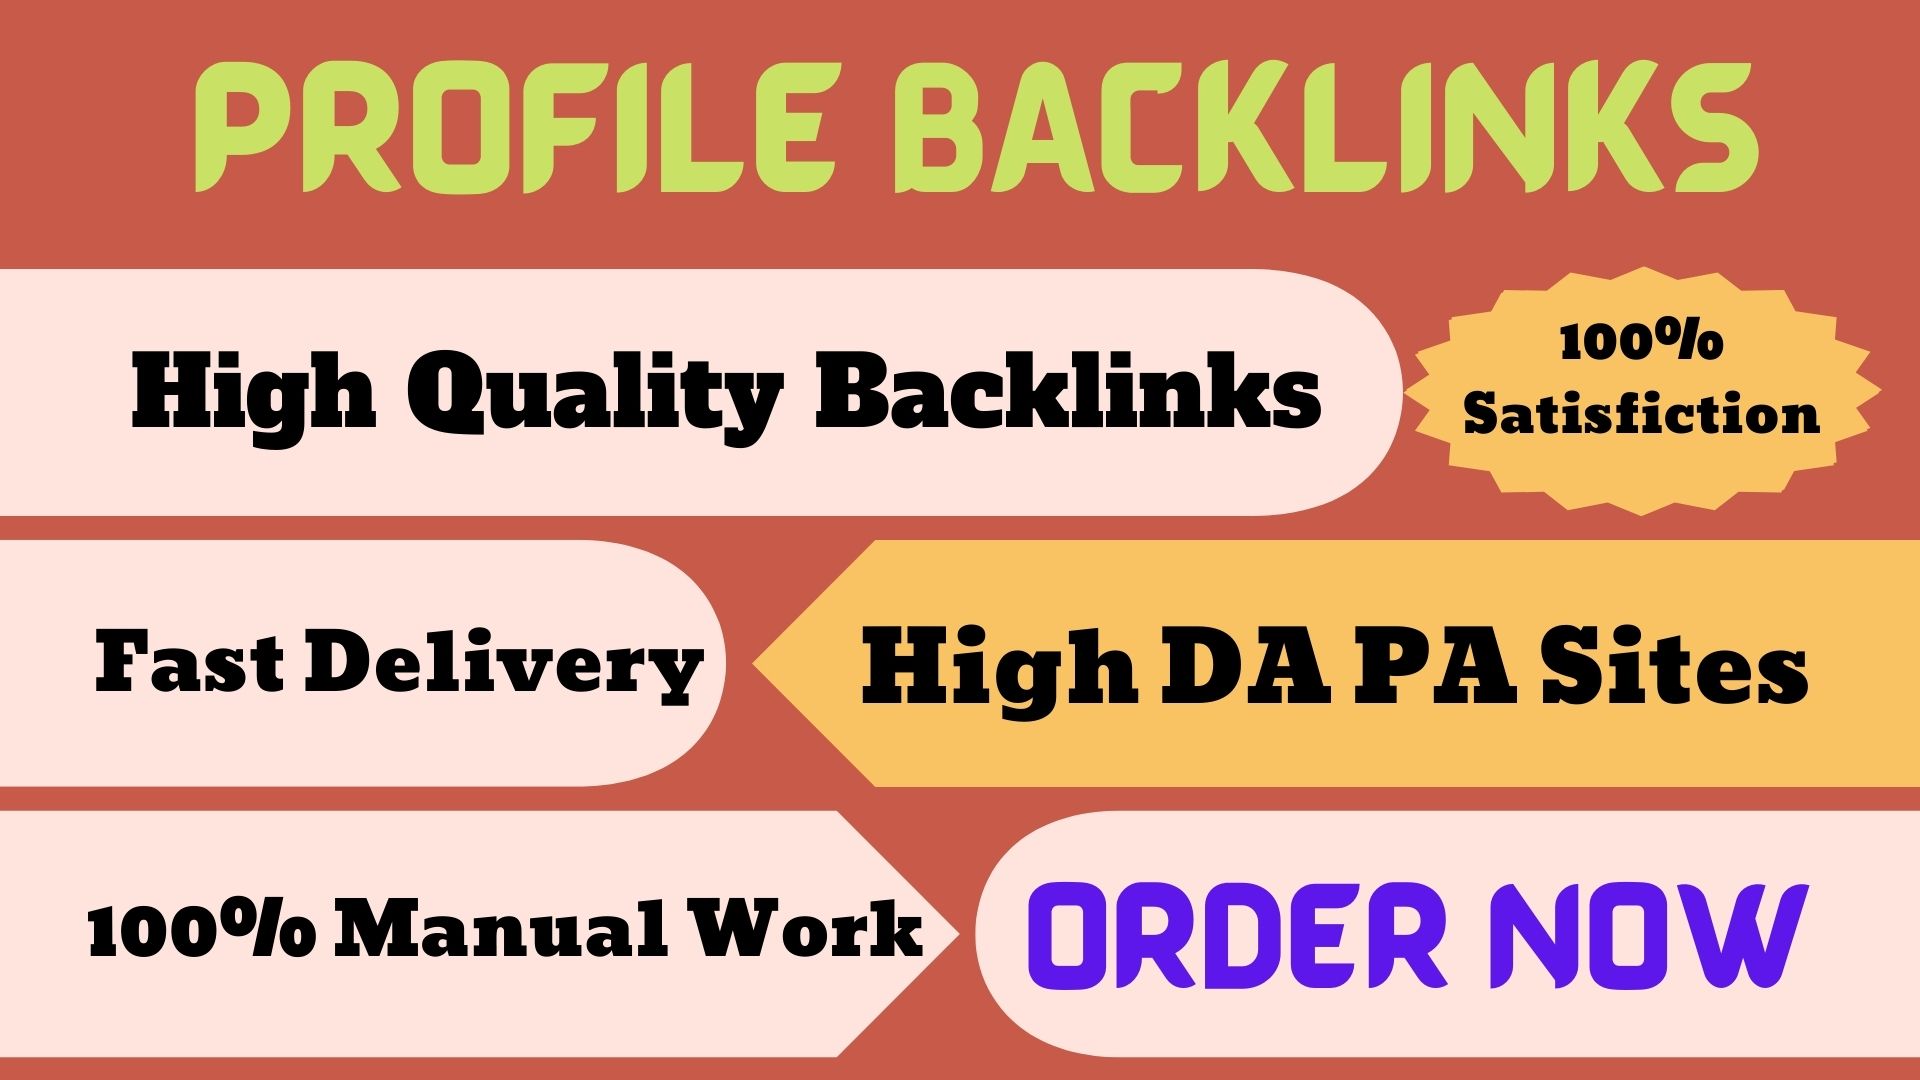 I will Provide 100 Profile Backlinks from high quality site